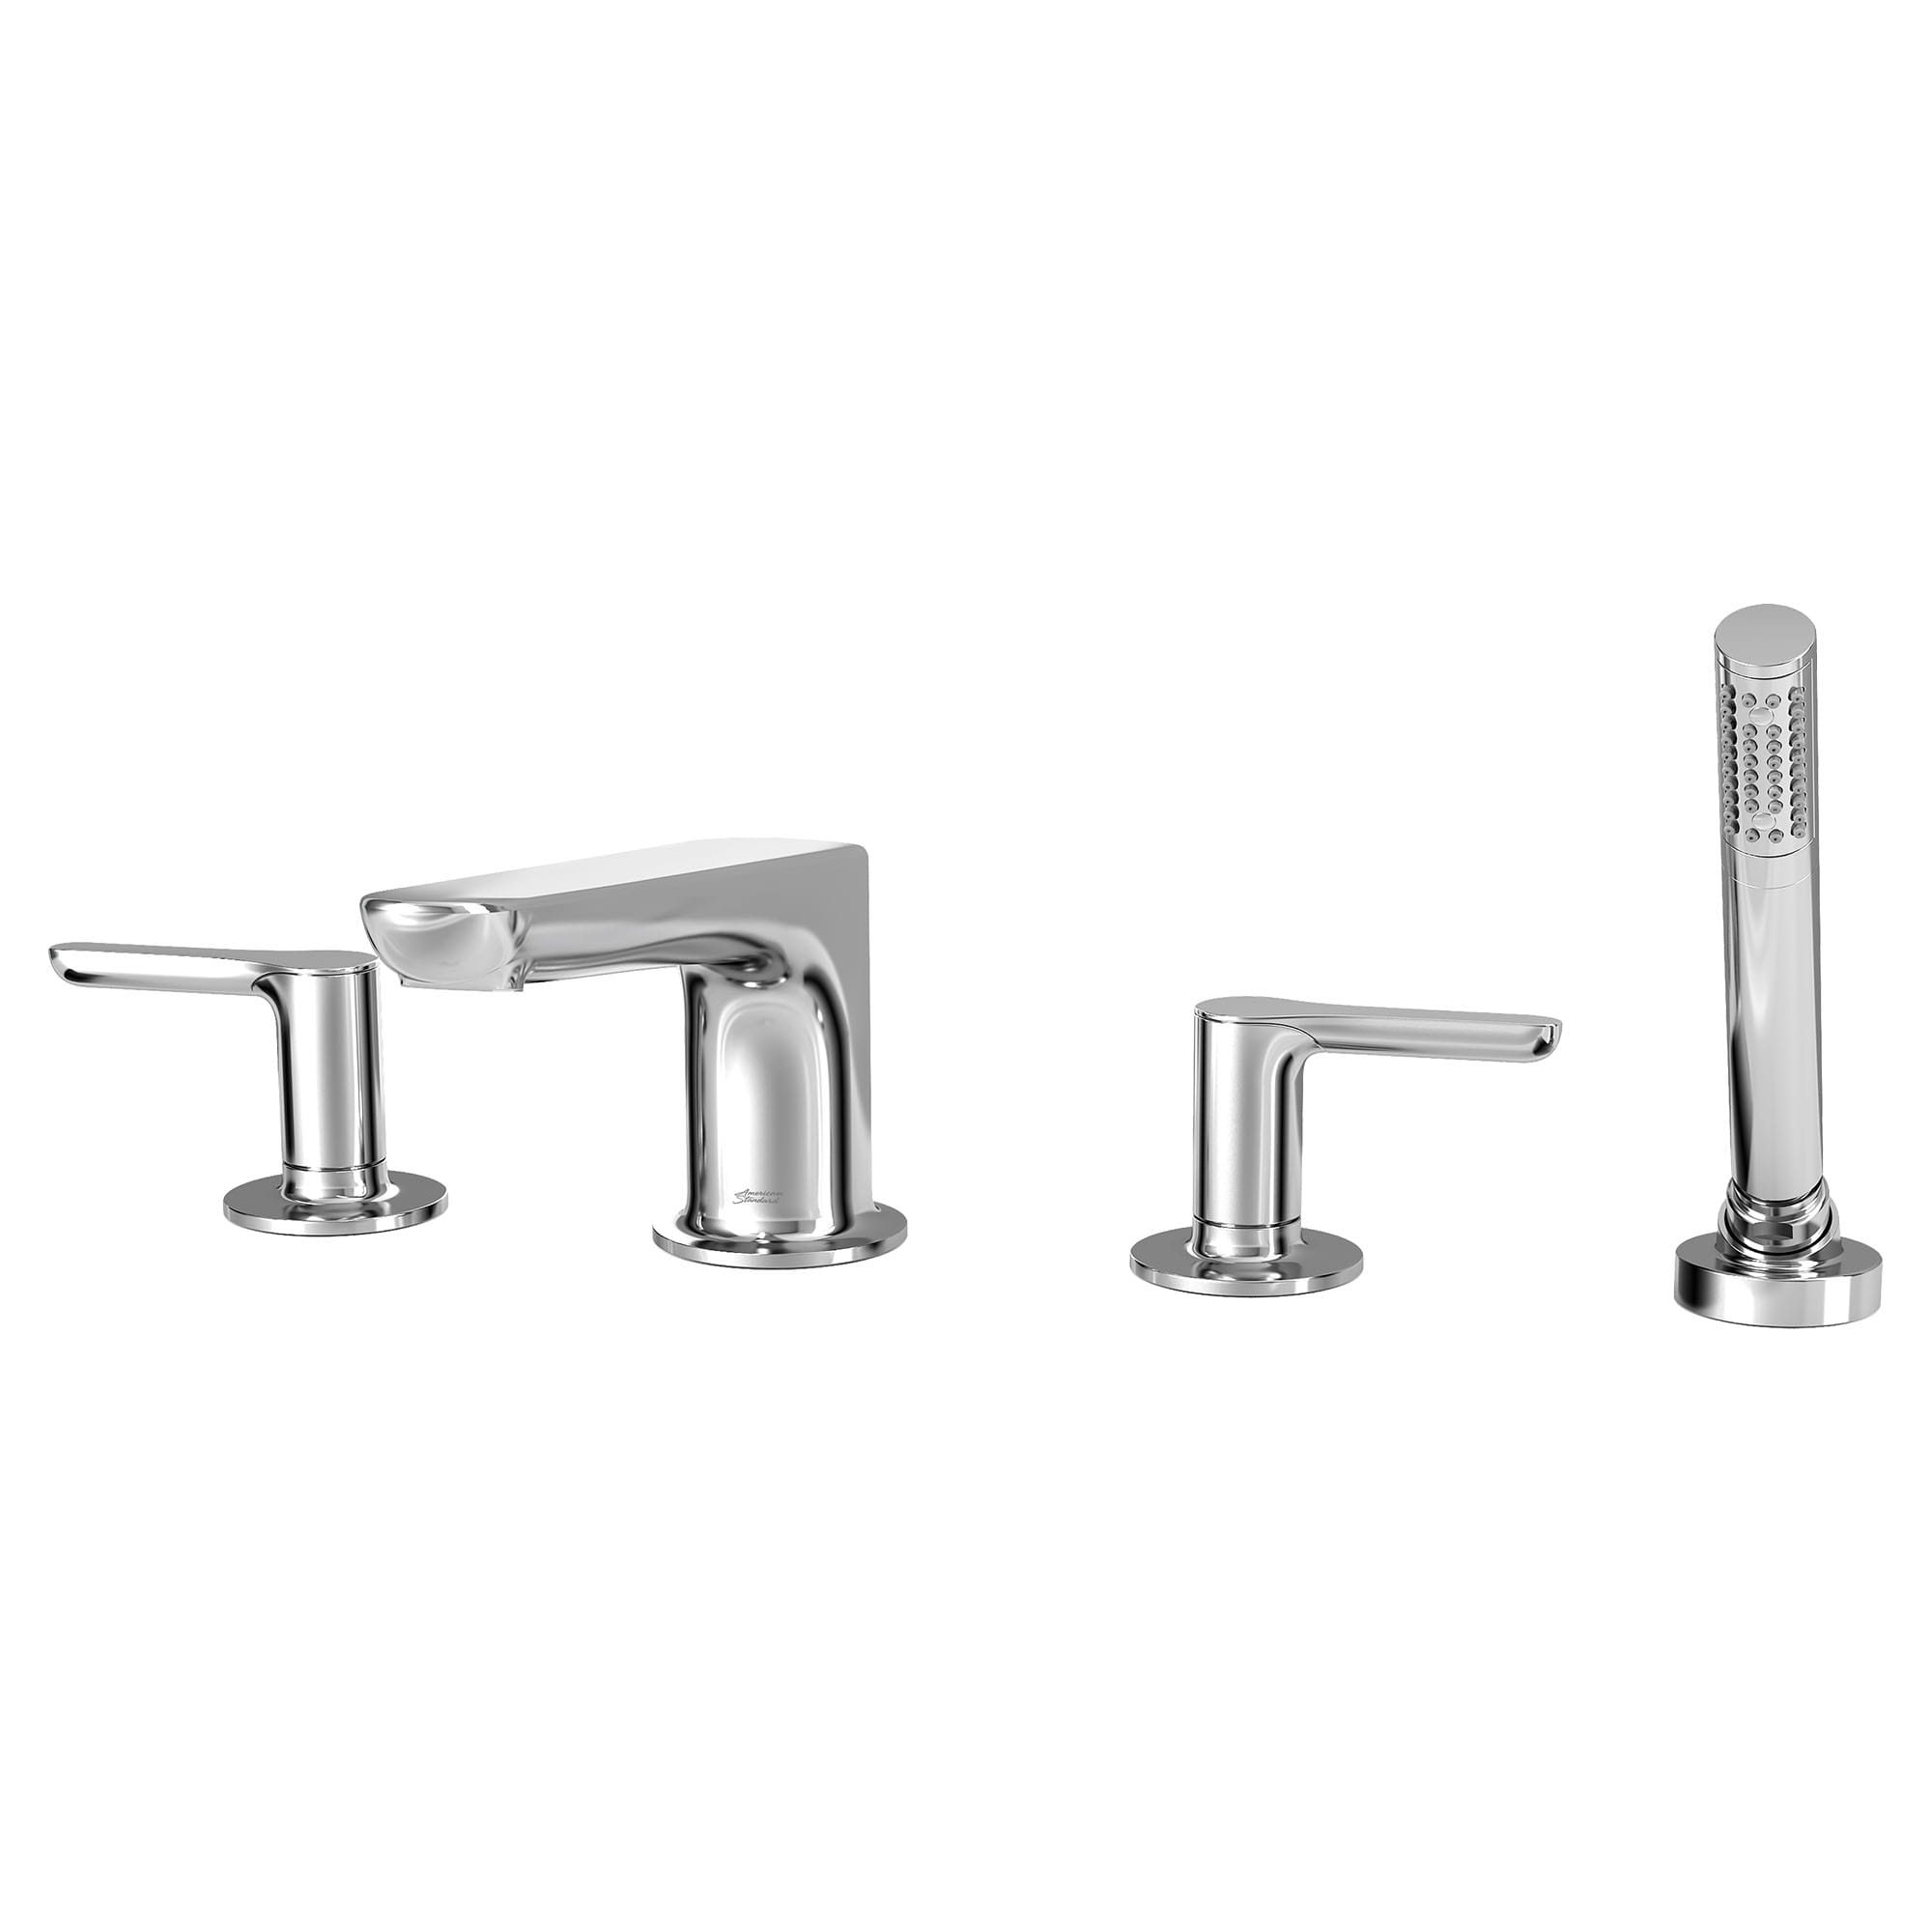 Studio S  Bathtub Faucet With Lever Handles and Personal Shower for Flash Rough In Valve CHROME